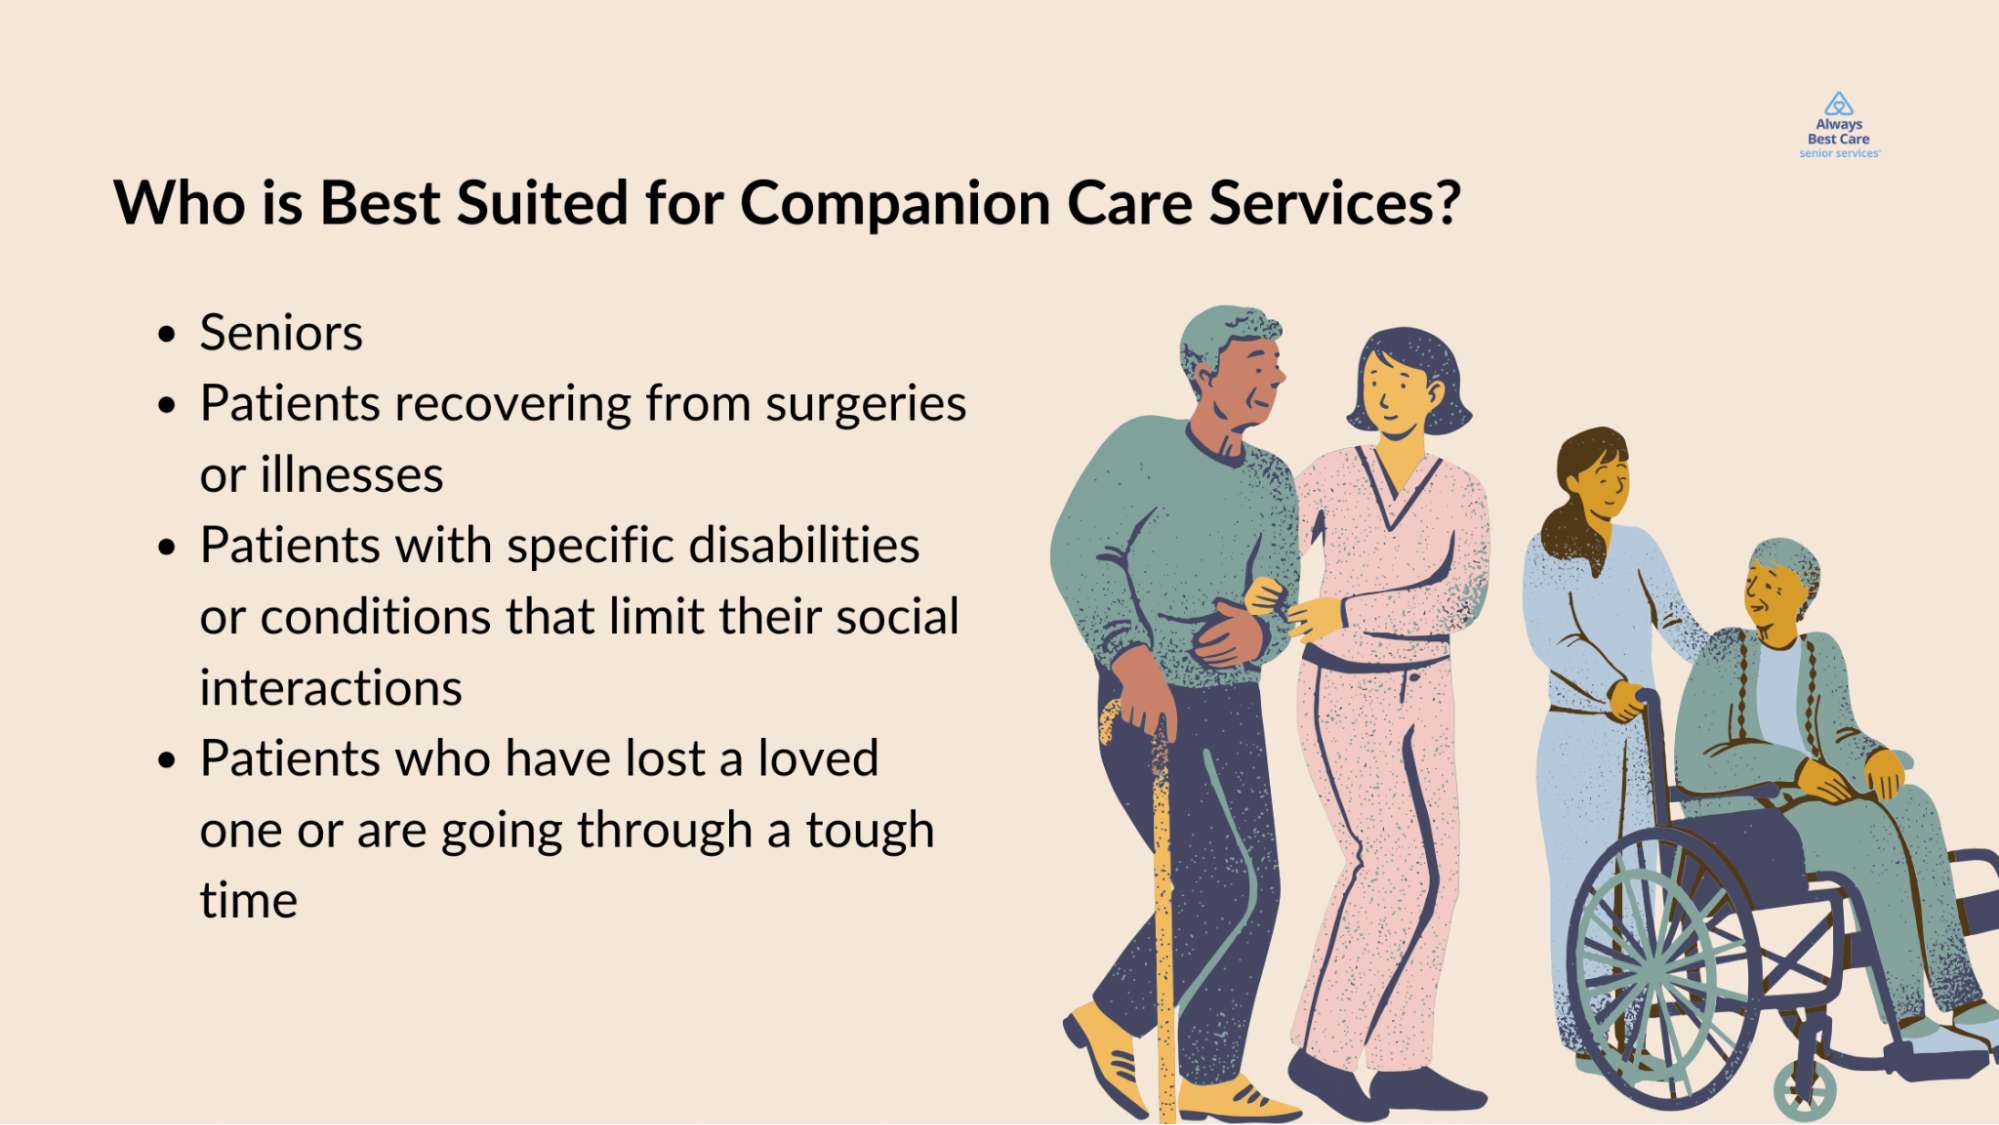 Candidates for companion care services